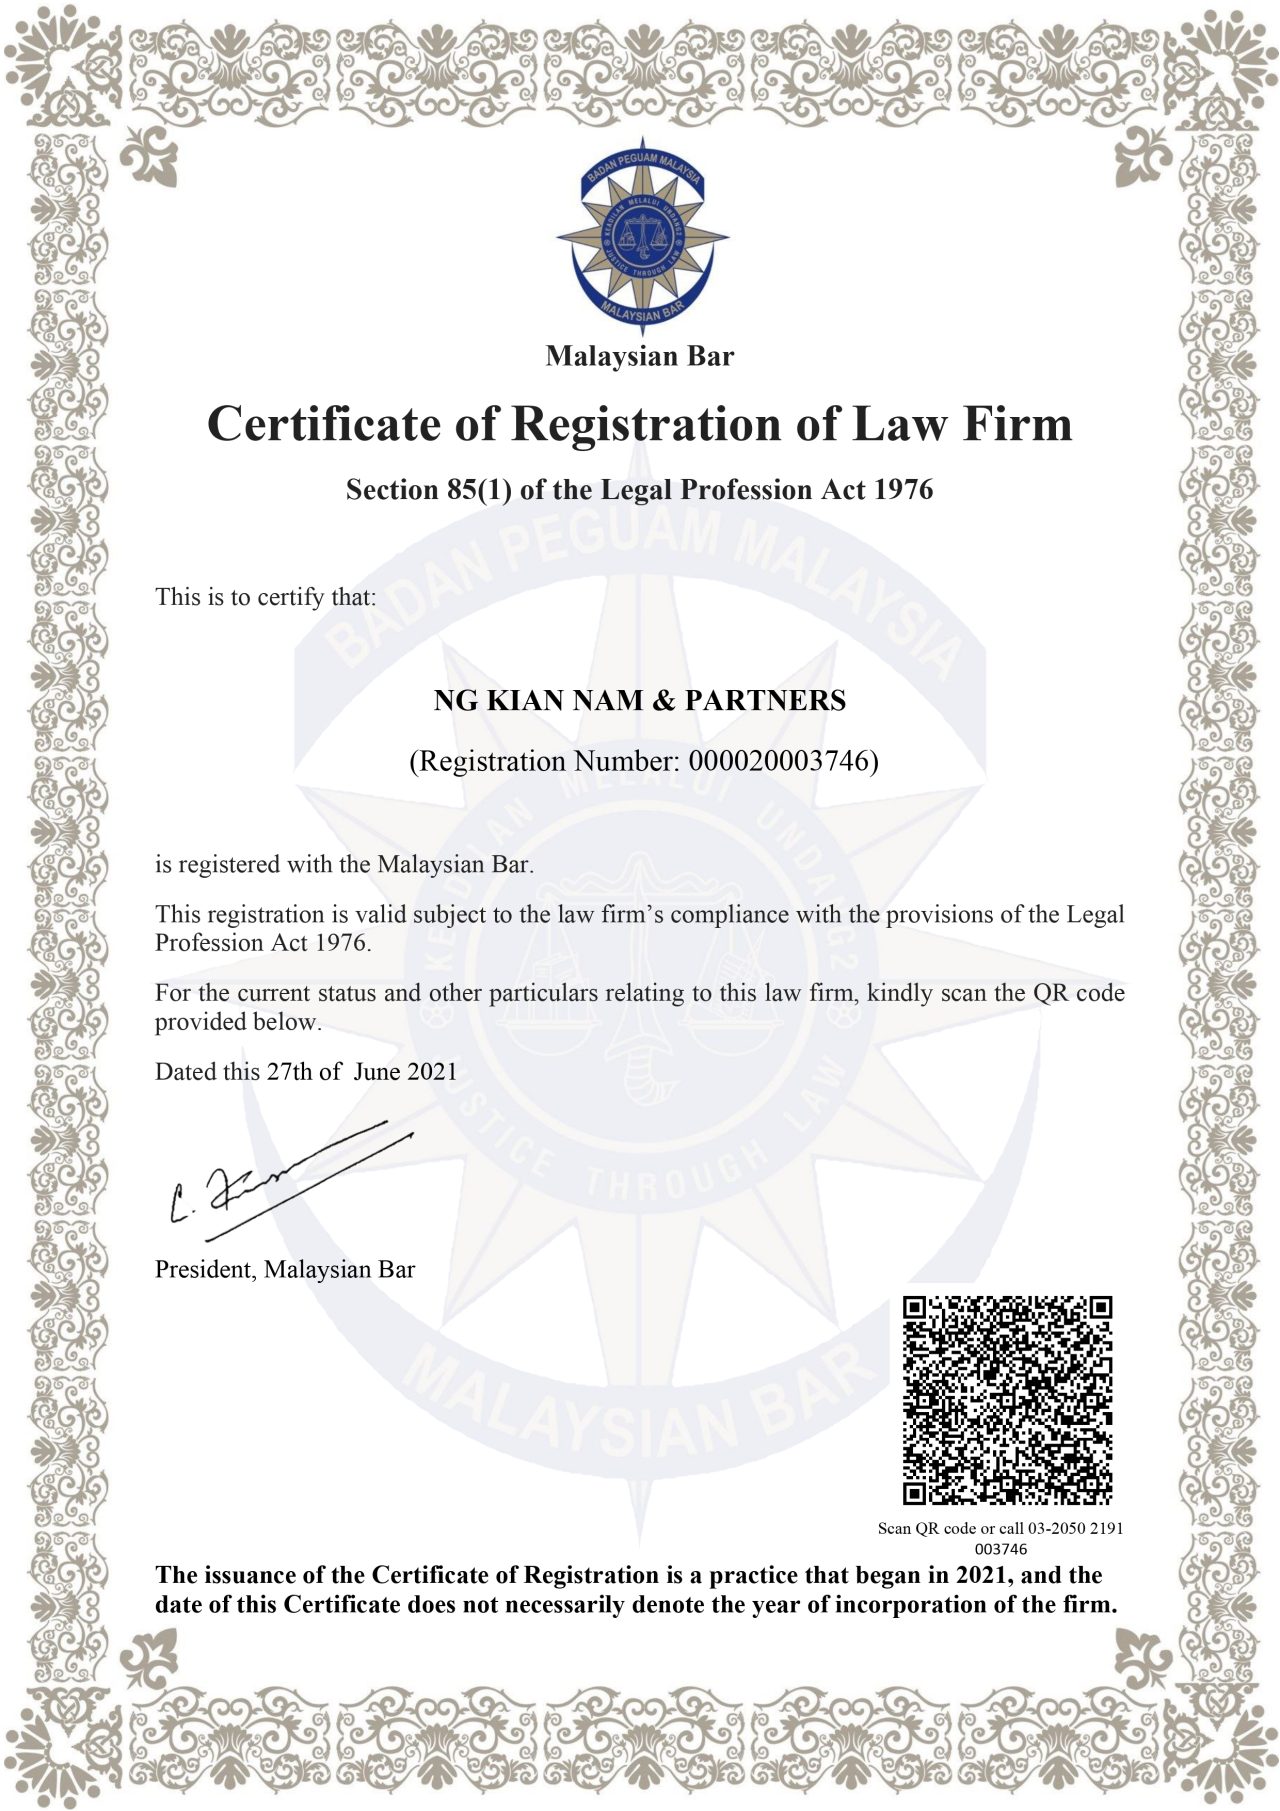 1. CERTIFICATE OF REGISTRATION OF LAW FIRM